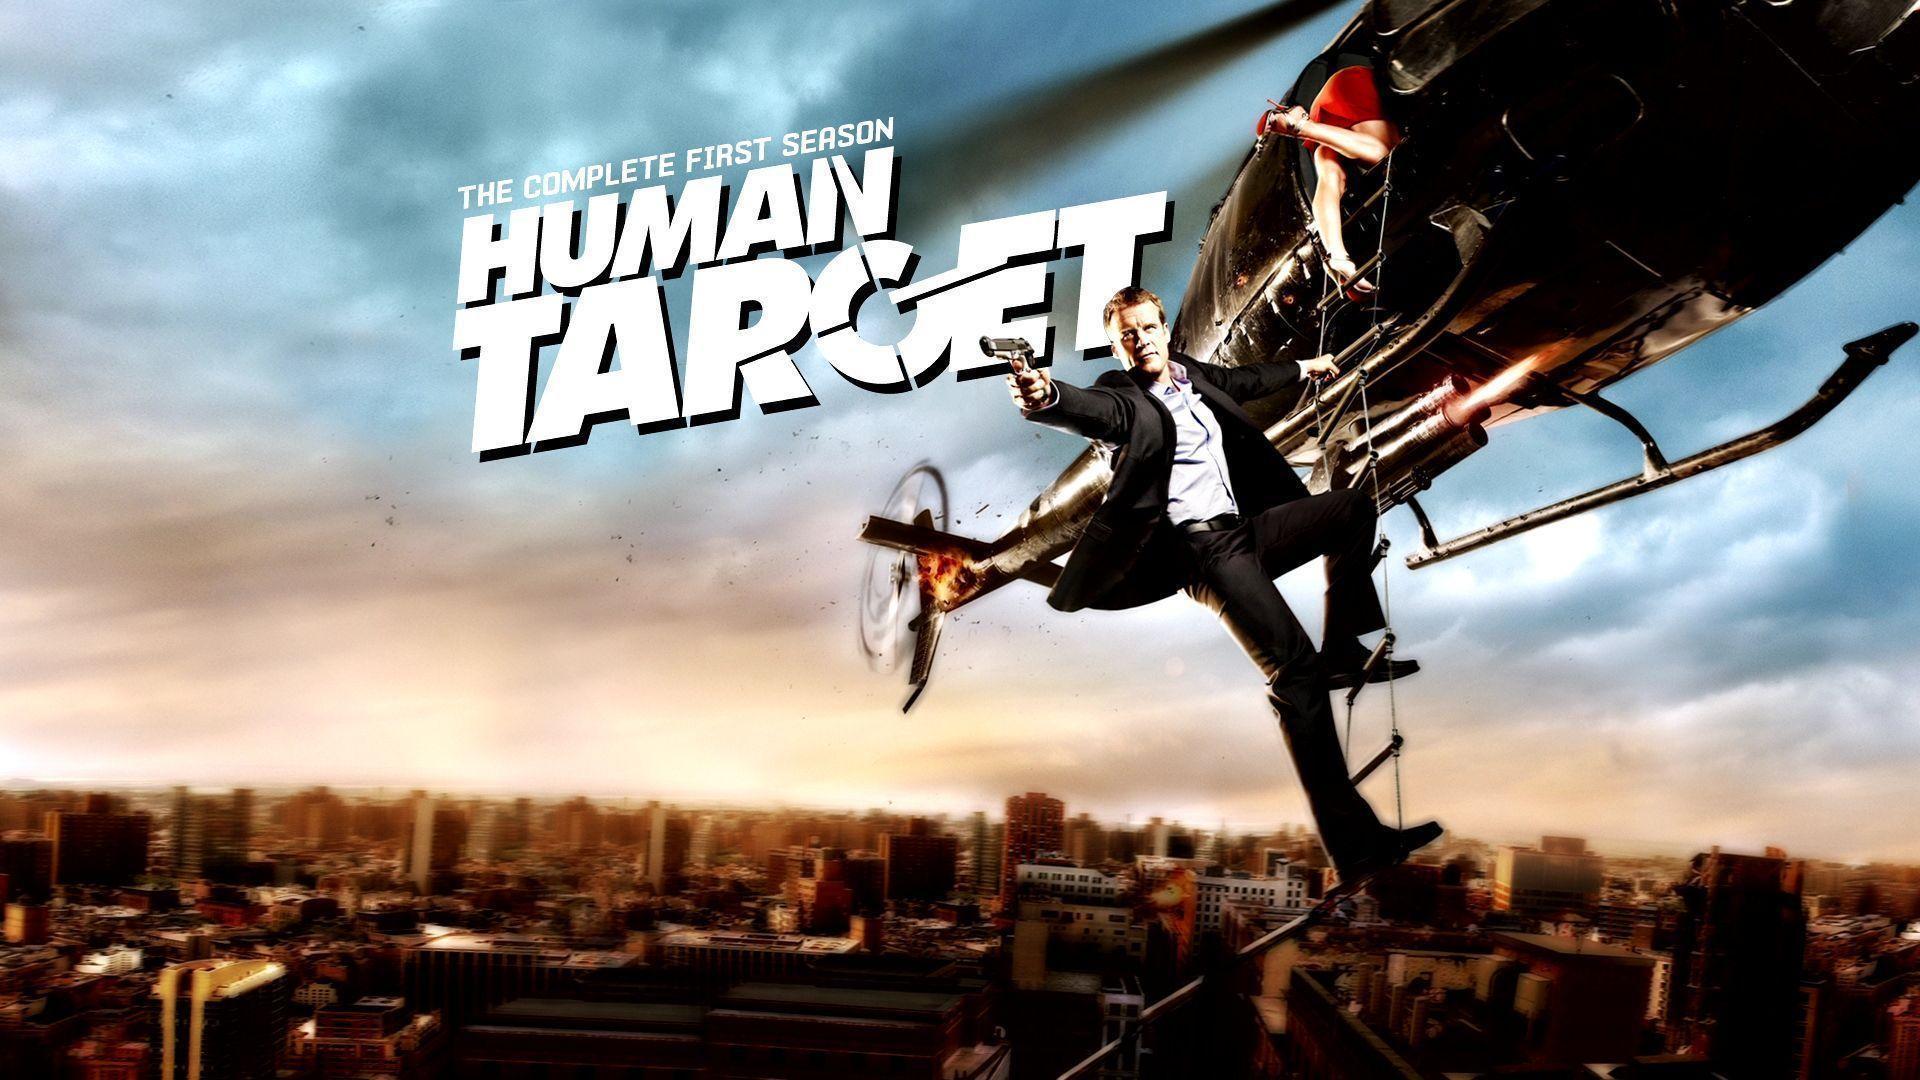 Human Target Complete Season 1 S01 Real Untouched Bluray 1080p VC